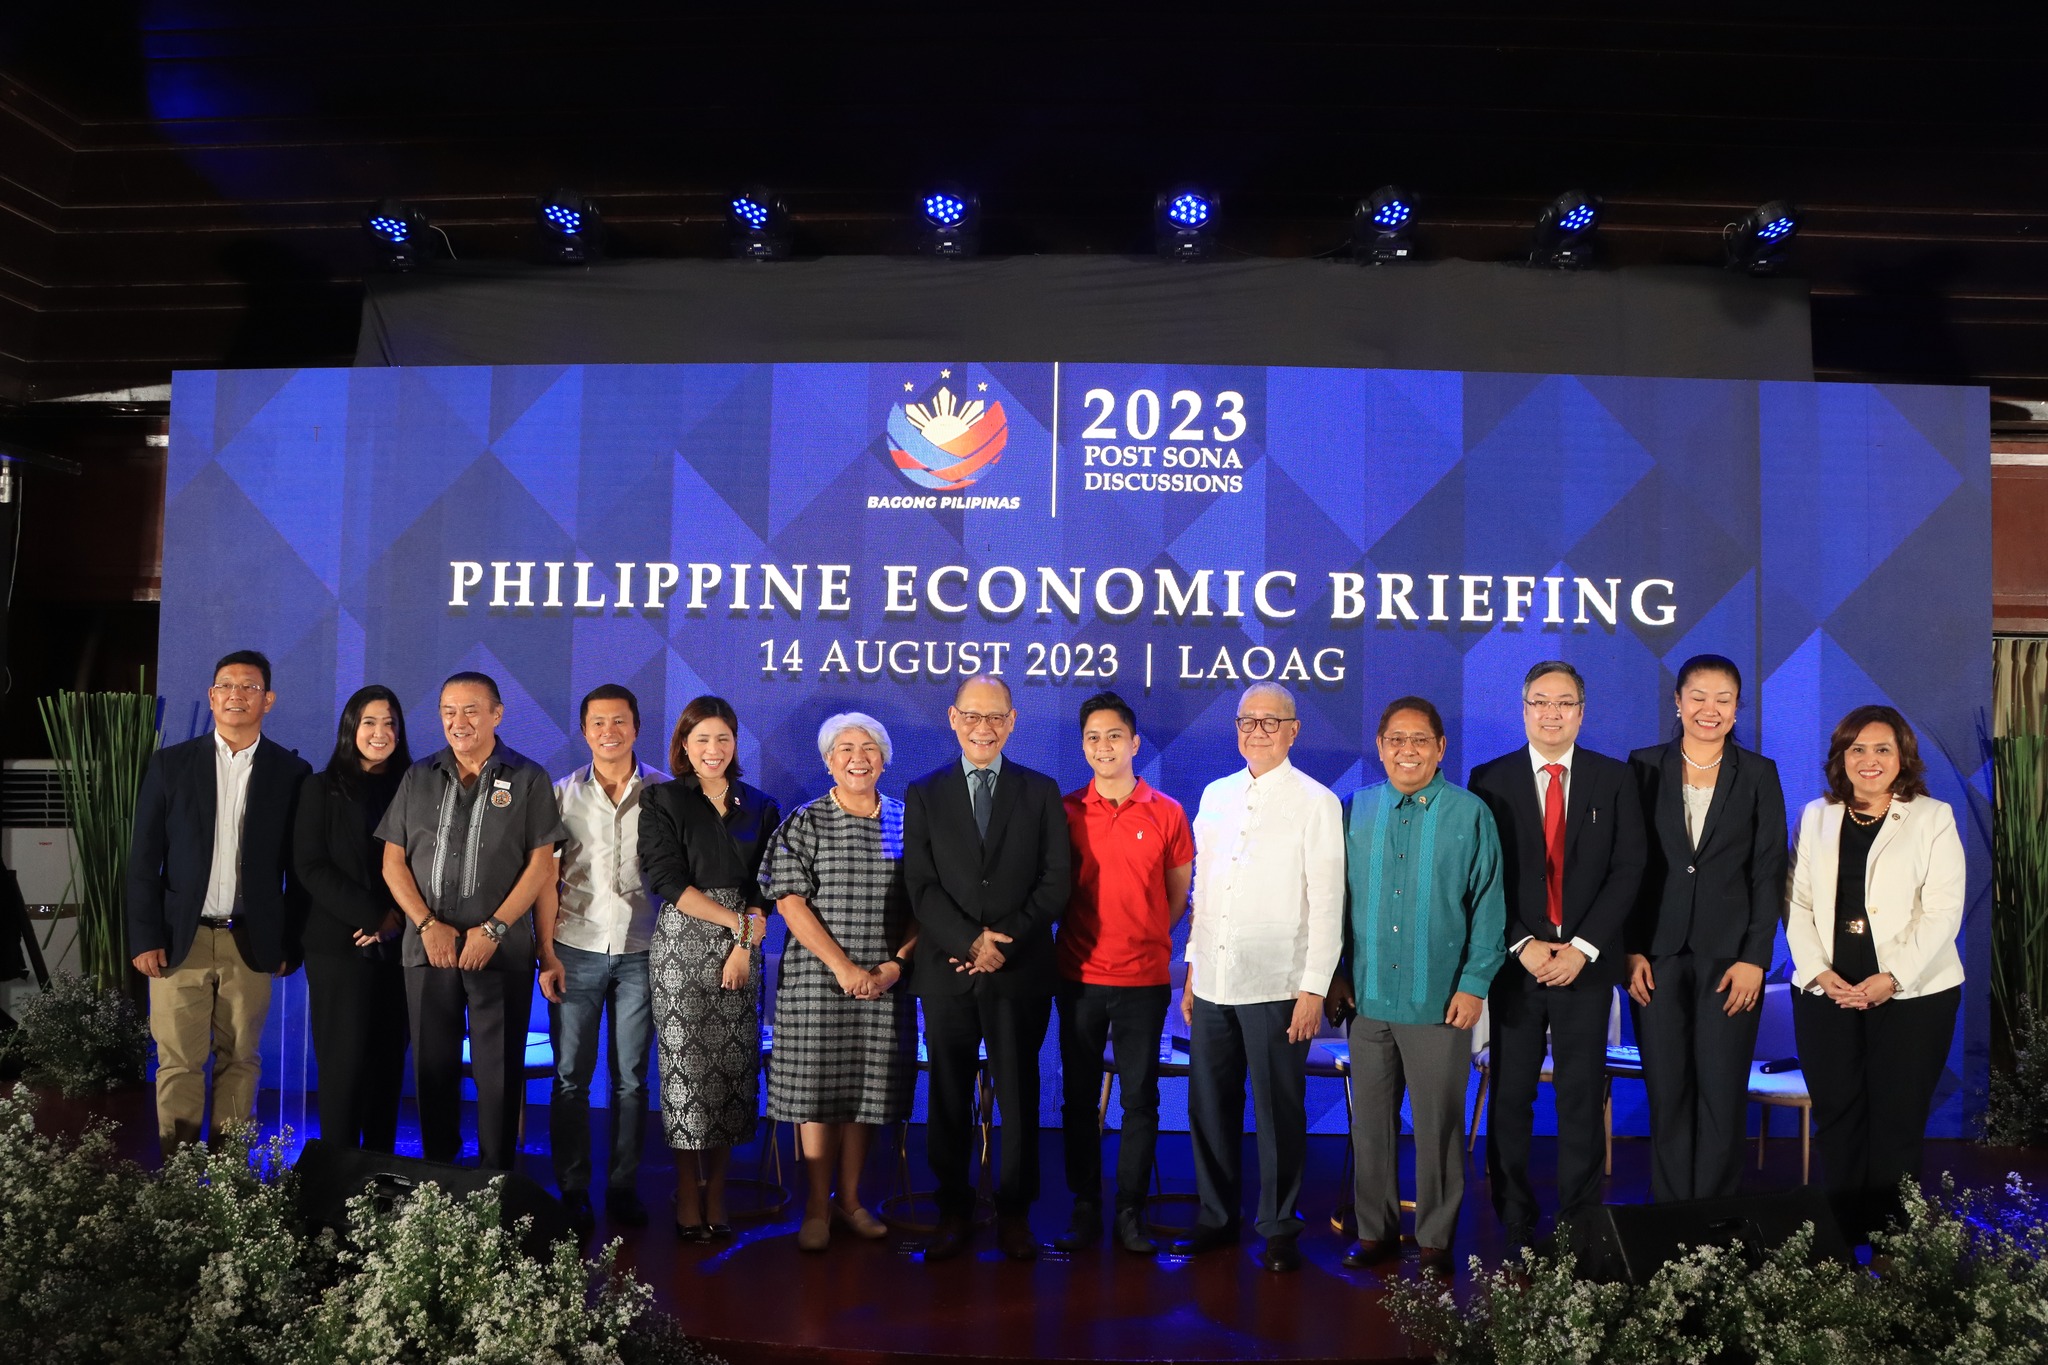 IN PHOTOS | Mayor Albert D. Chua joined national and local officials in the Philippine Economic Briefing (PEB) held today at the Fort Ilocandia Resort Hotel, Laoag City